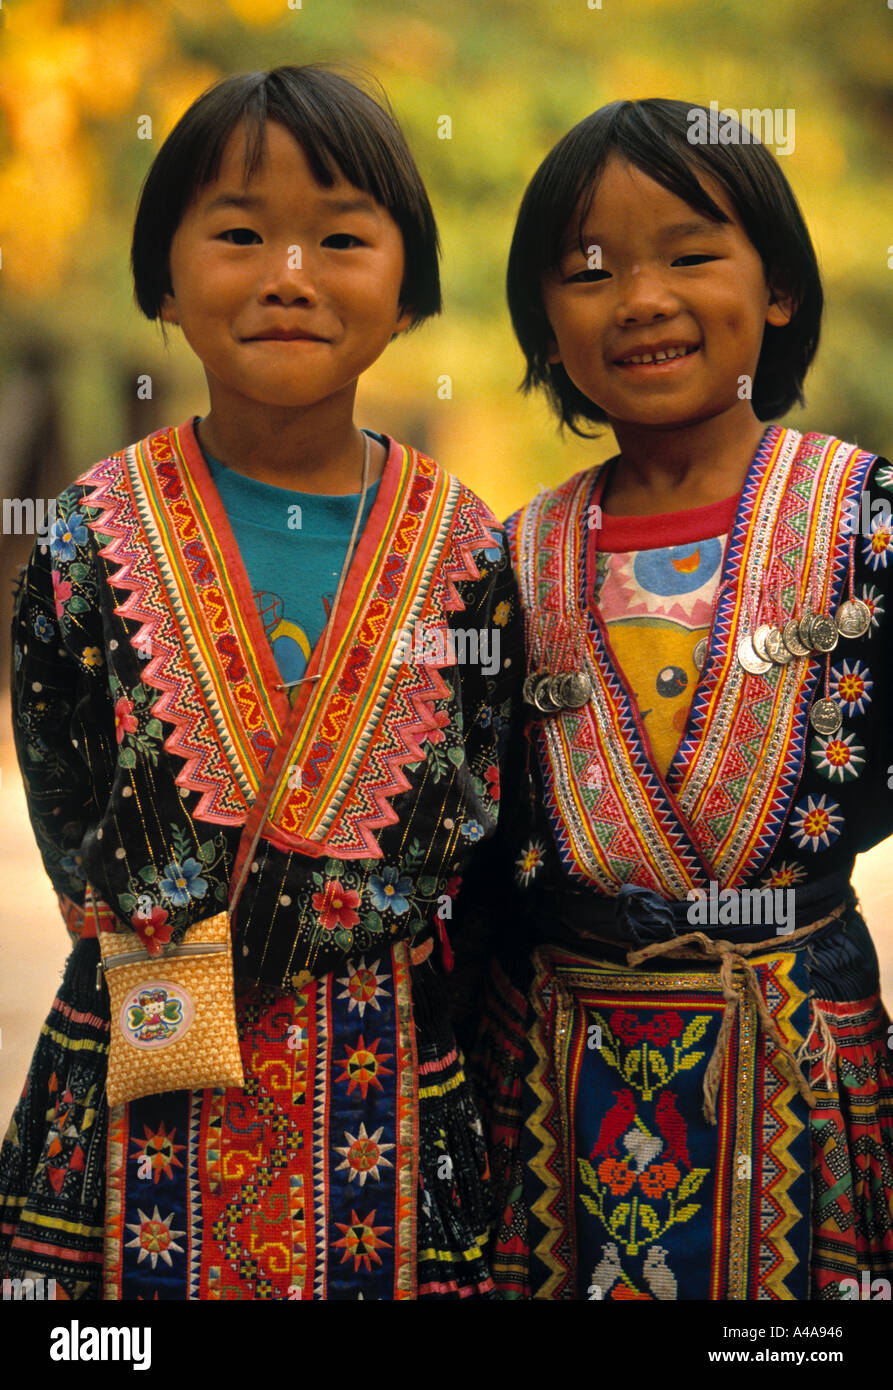 Hmong Hill Tribe, Chiang Mai area, Thailand Stock Photo